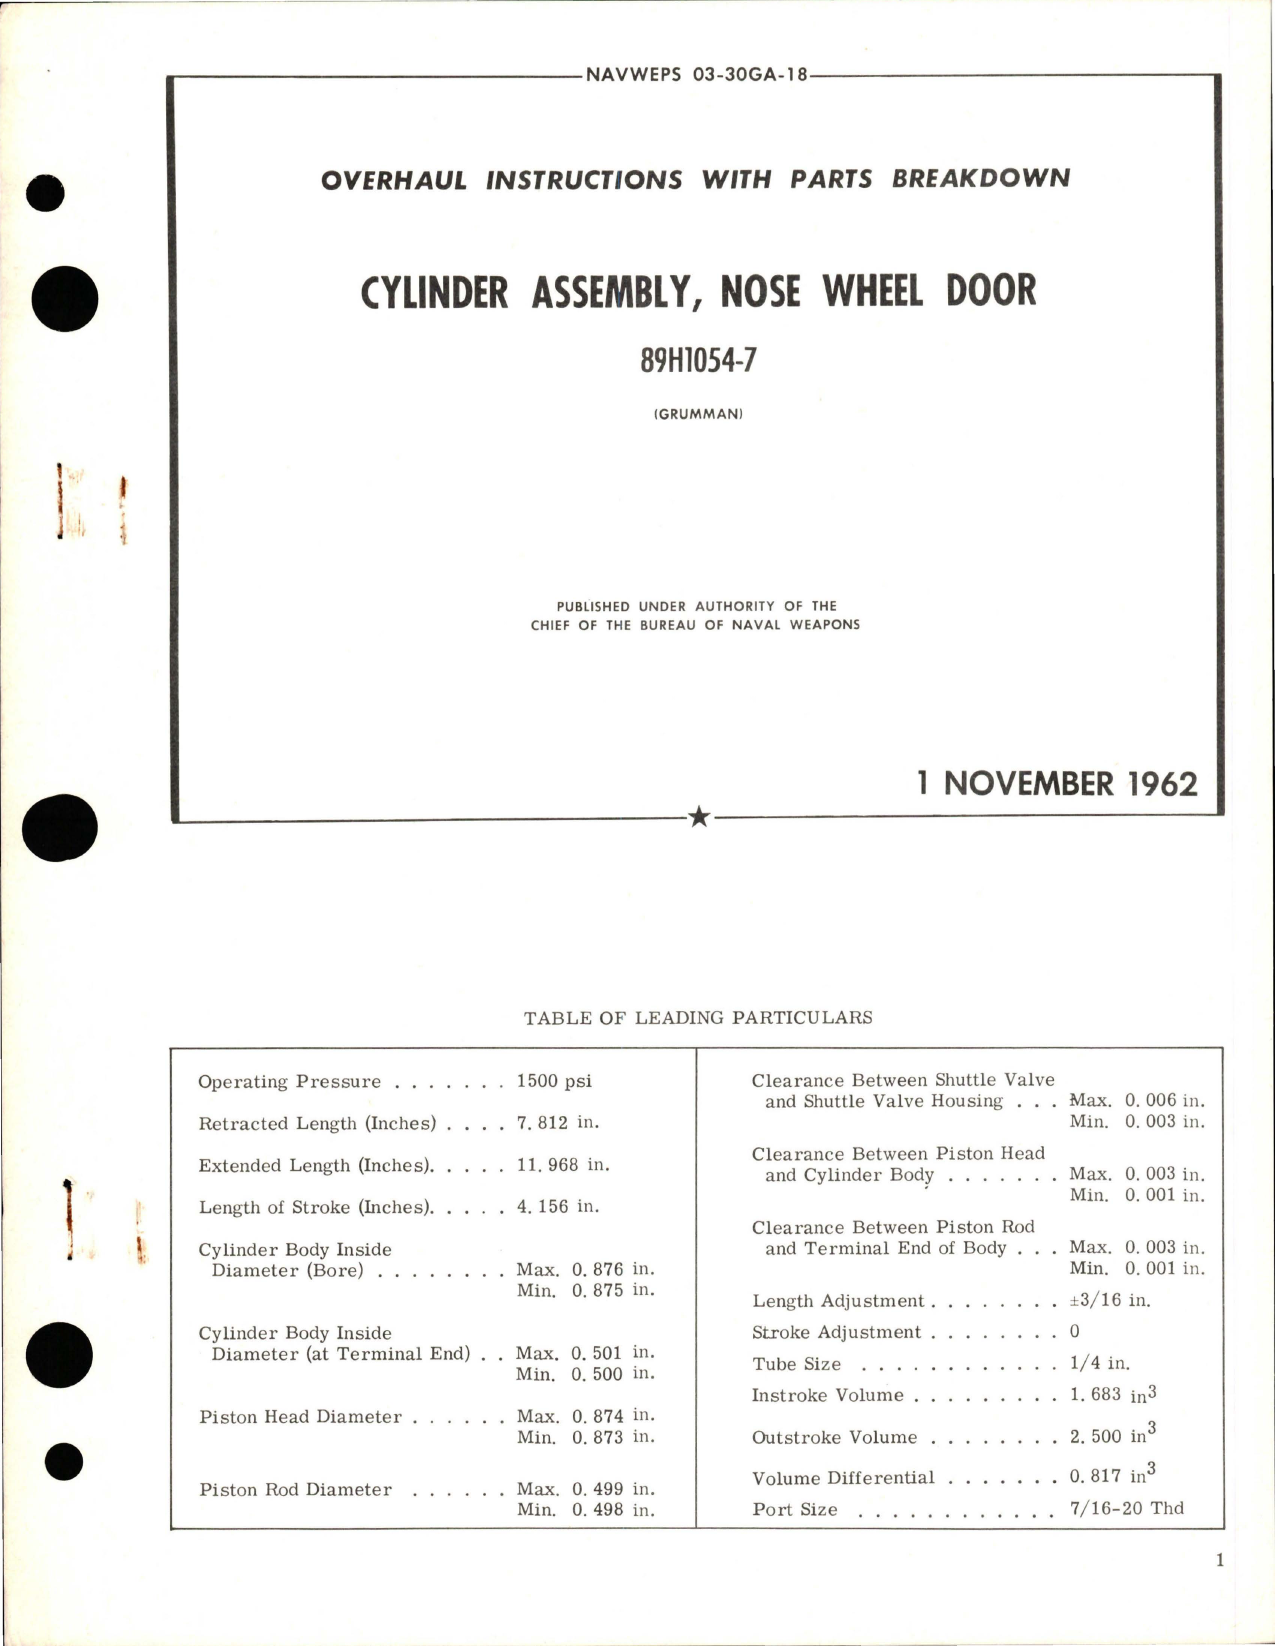 Sample page 1 from AirCorps Library document: Overhaul Instructions with Parts Breakdown for Nose Wheel Door Cylinder Assembly - 89H1054-7